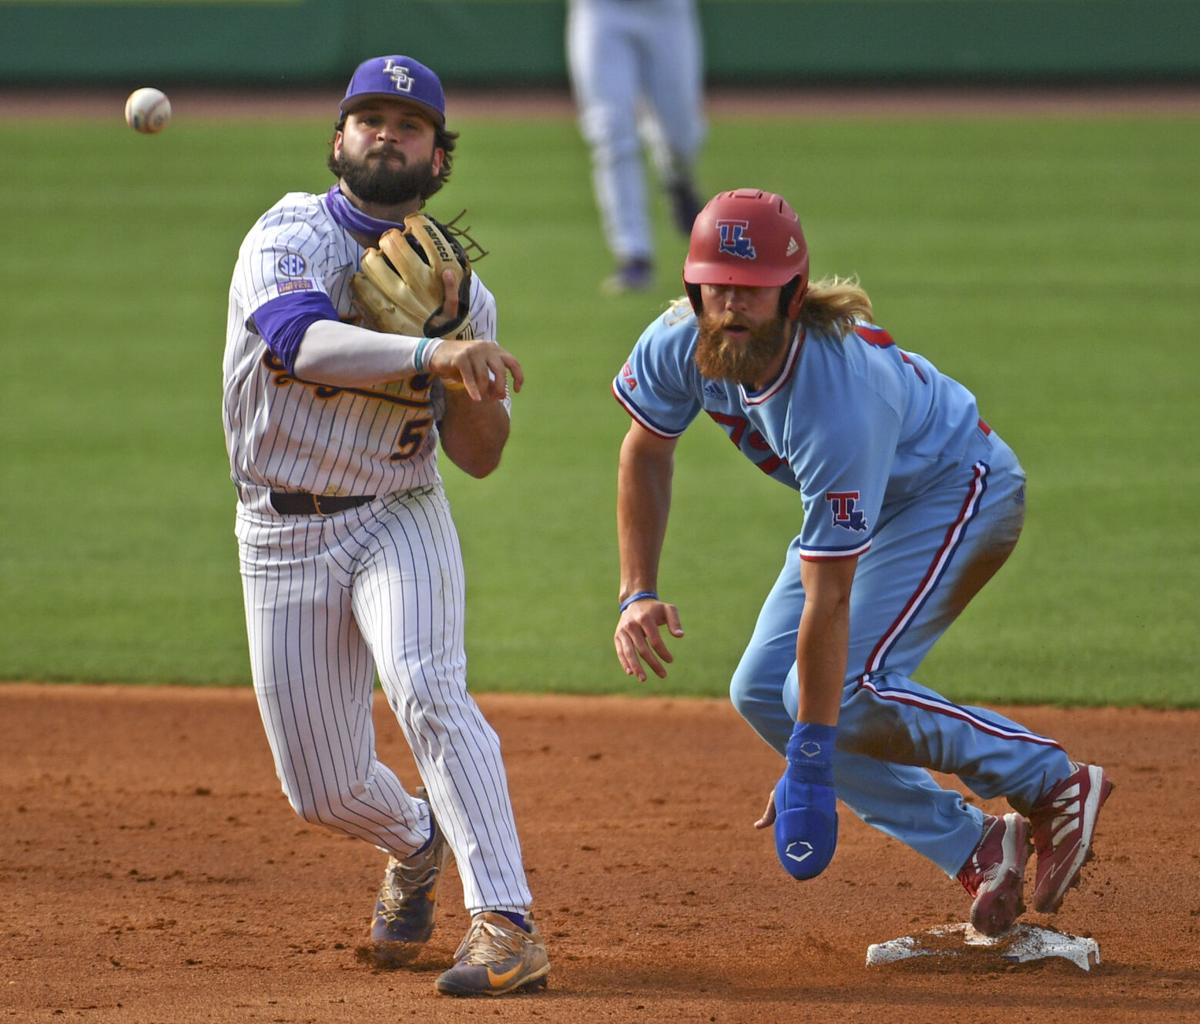 Drew Bianco, a year after considering transfer, becomes second baseman | LSU | theadvocate.com